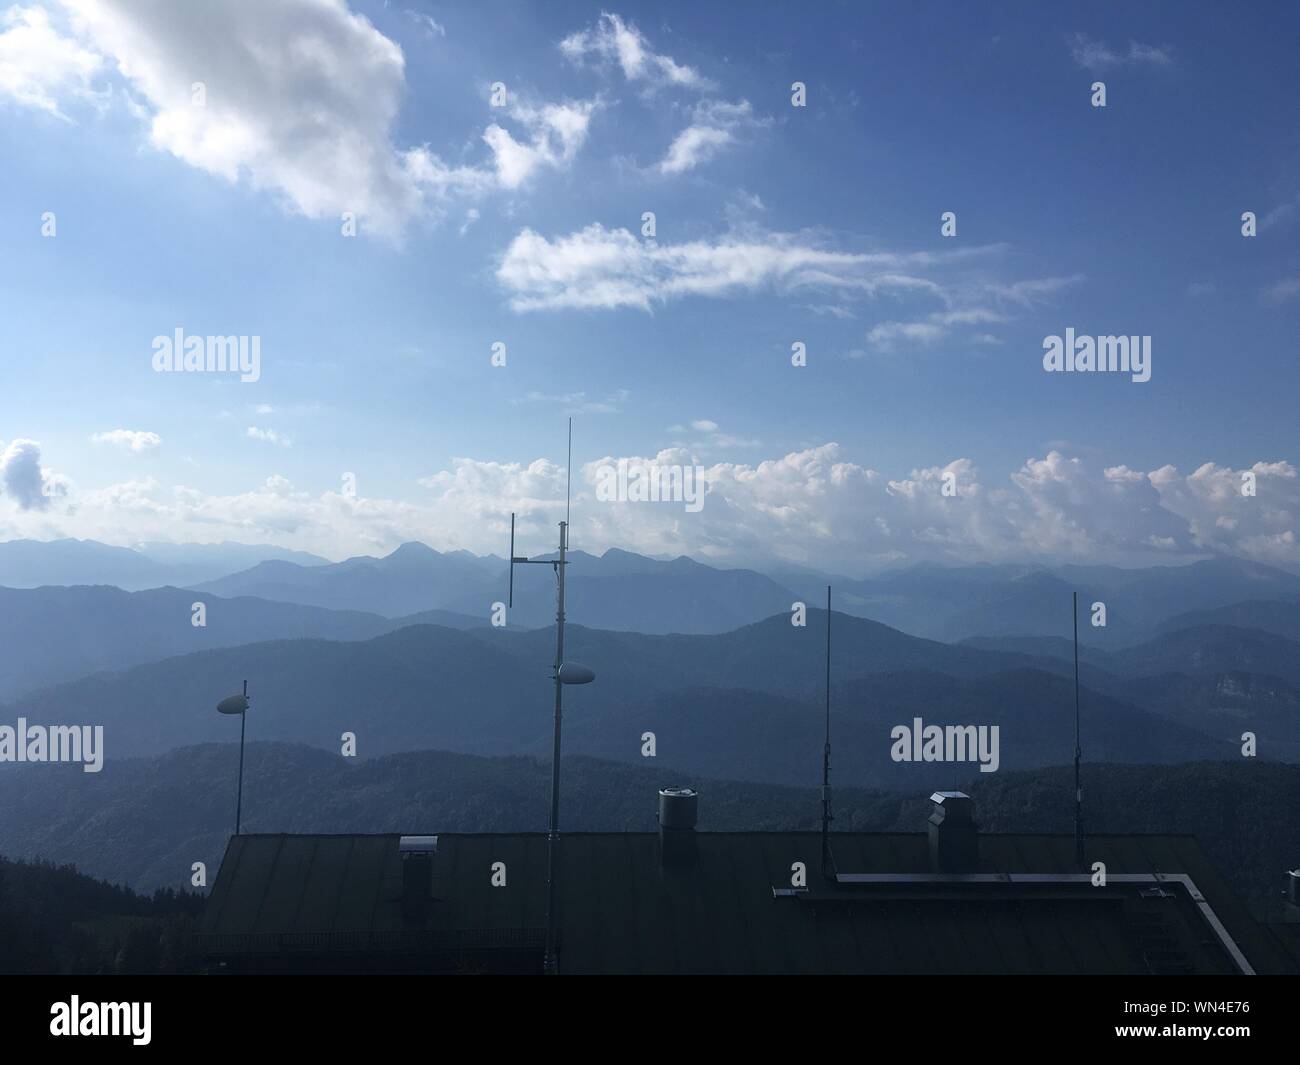 Antenna On Rooftop Of House Against Mountain Range Stock Photo